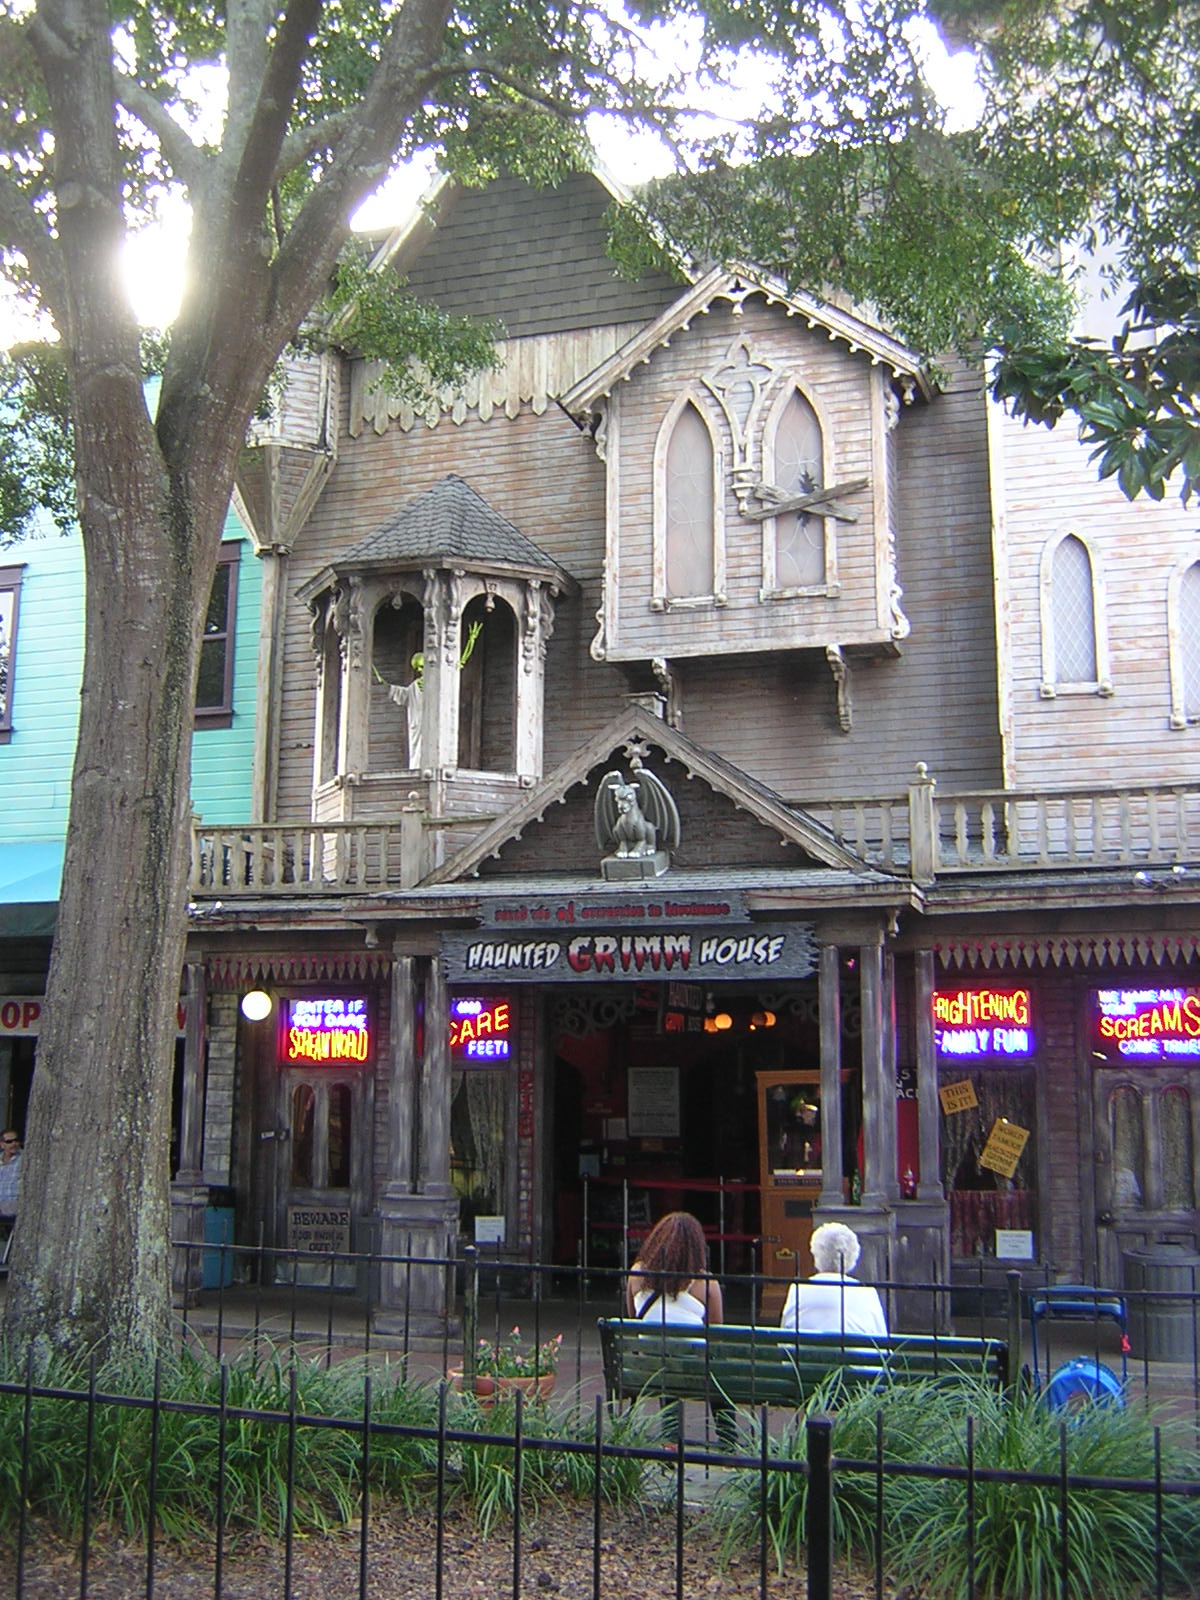 the facade of the Haunted Grimm House